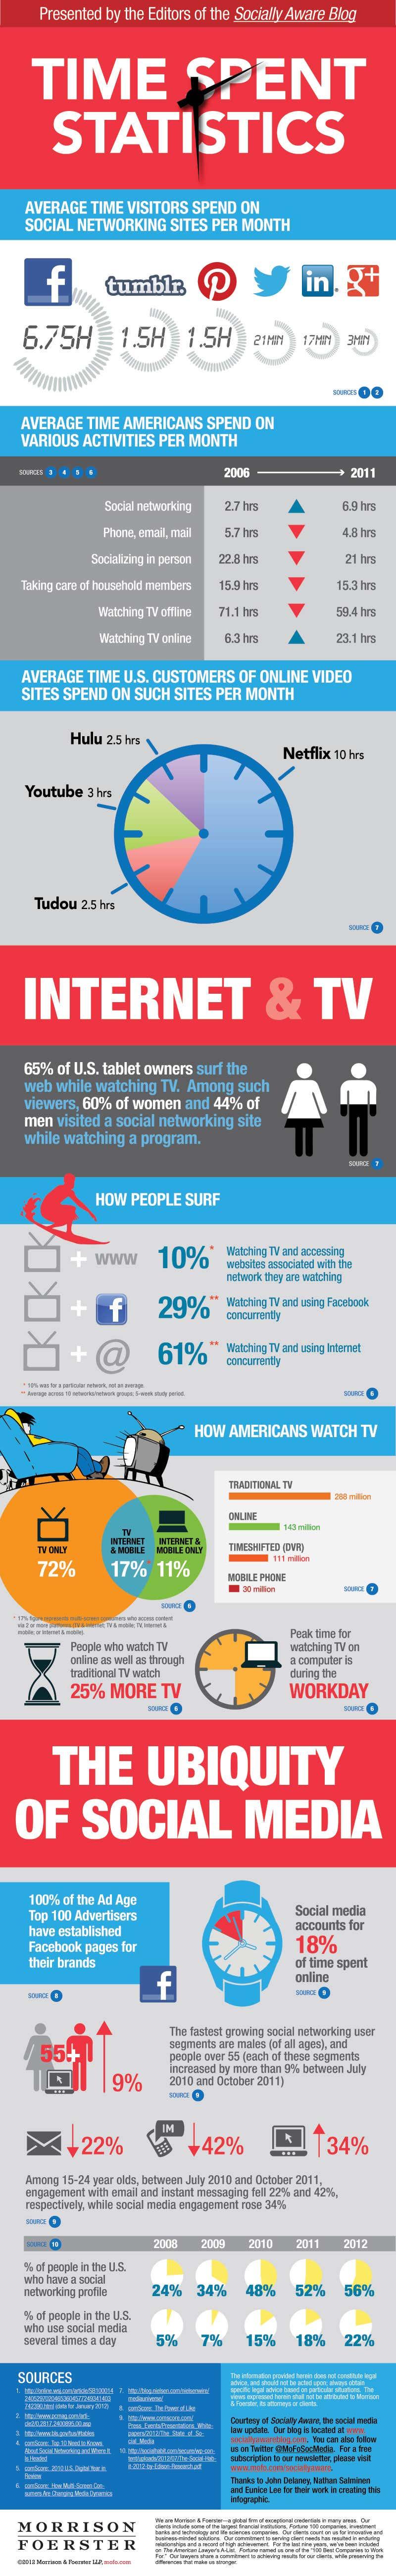 Infographic: The Growing Impact of Social Media